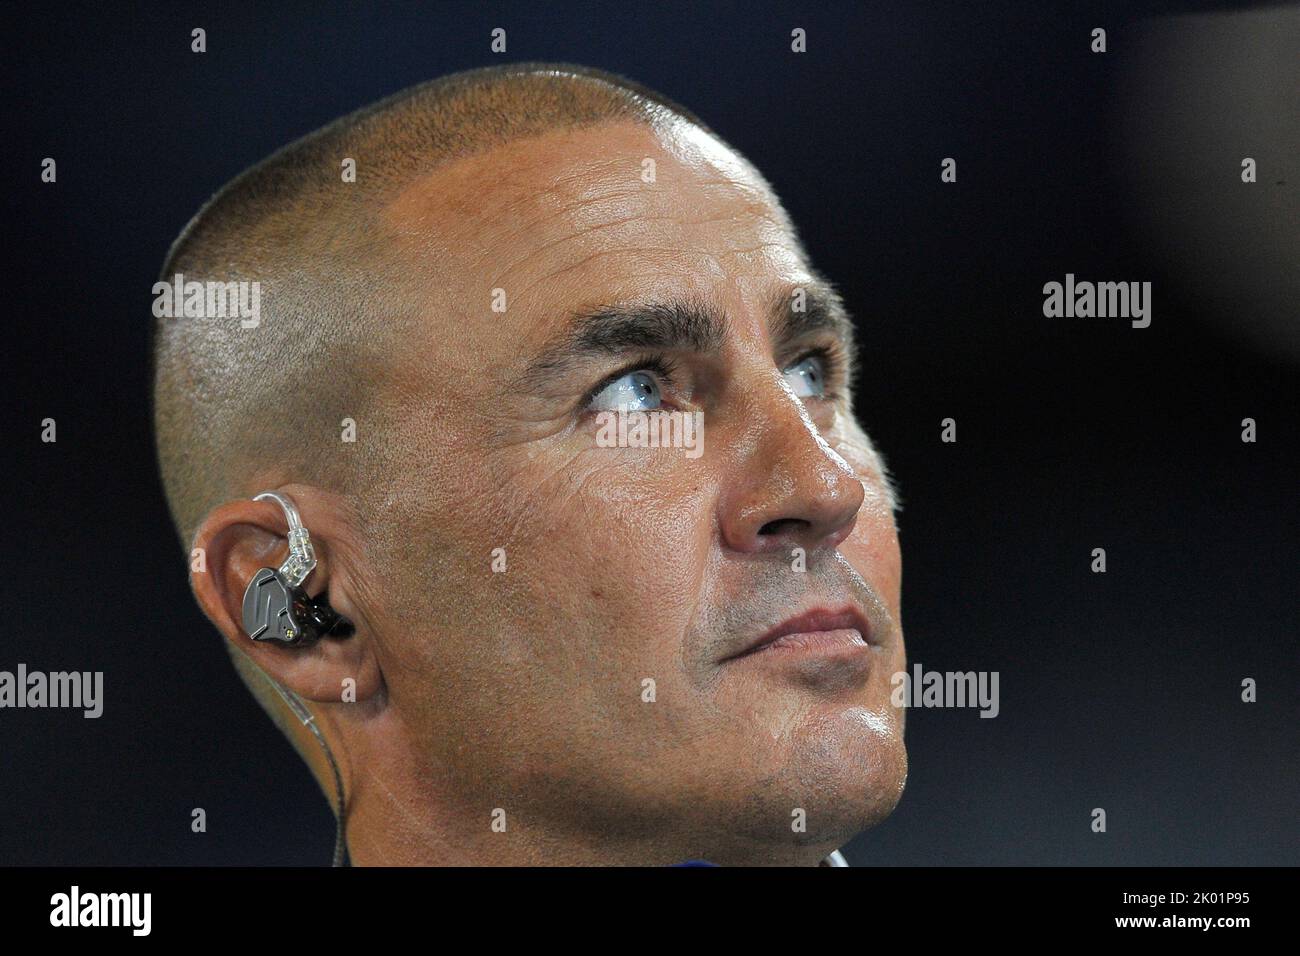 Fabio Cannavaro former footballer , during the match of the uefa champions league between Napoli vs Liverpool final result, Napoli 4, Liverpool 1, mat Stock Photo